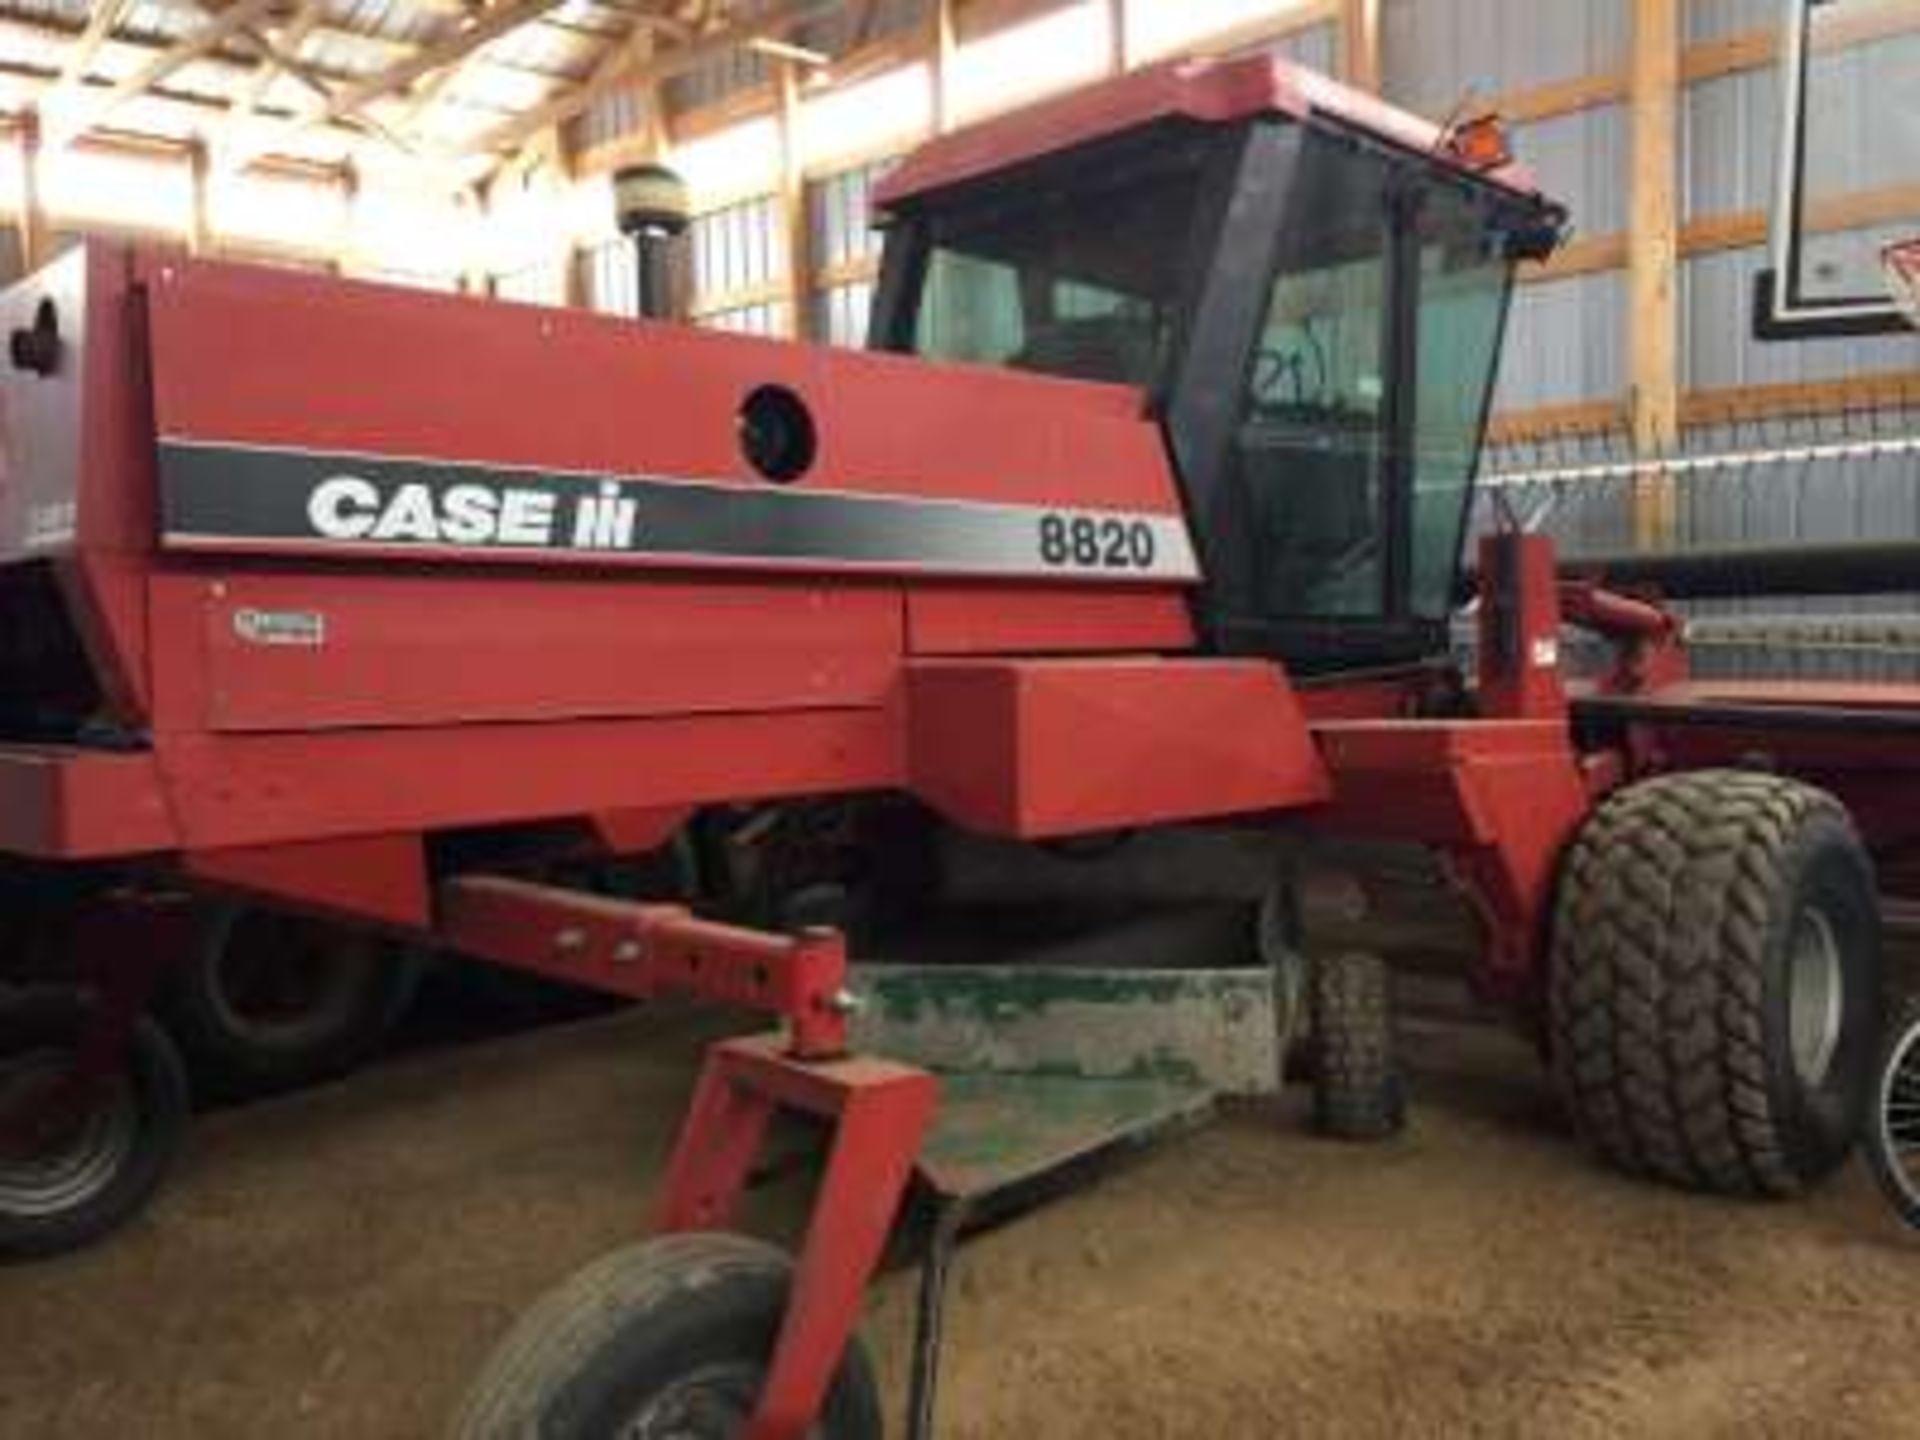 1997 Case IH #8820 S.P. swather, cab, 25ft table (shifting), PU reels, tires good, 1910 hrs (nice - Image 9 of 9